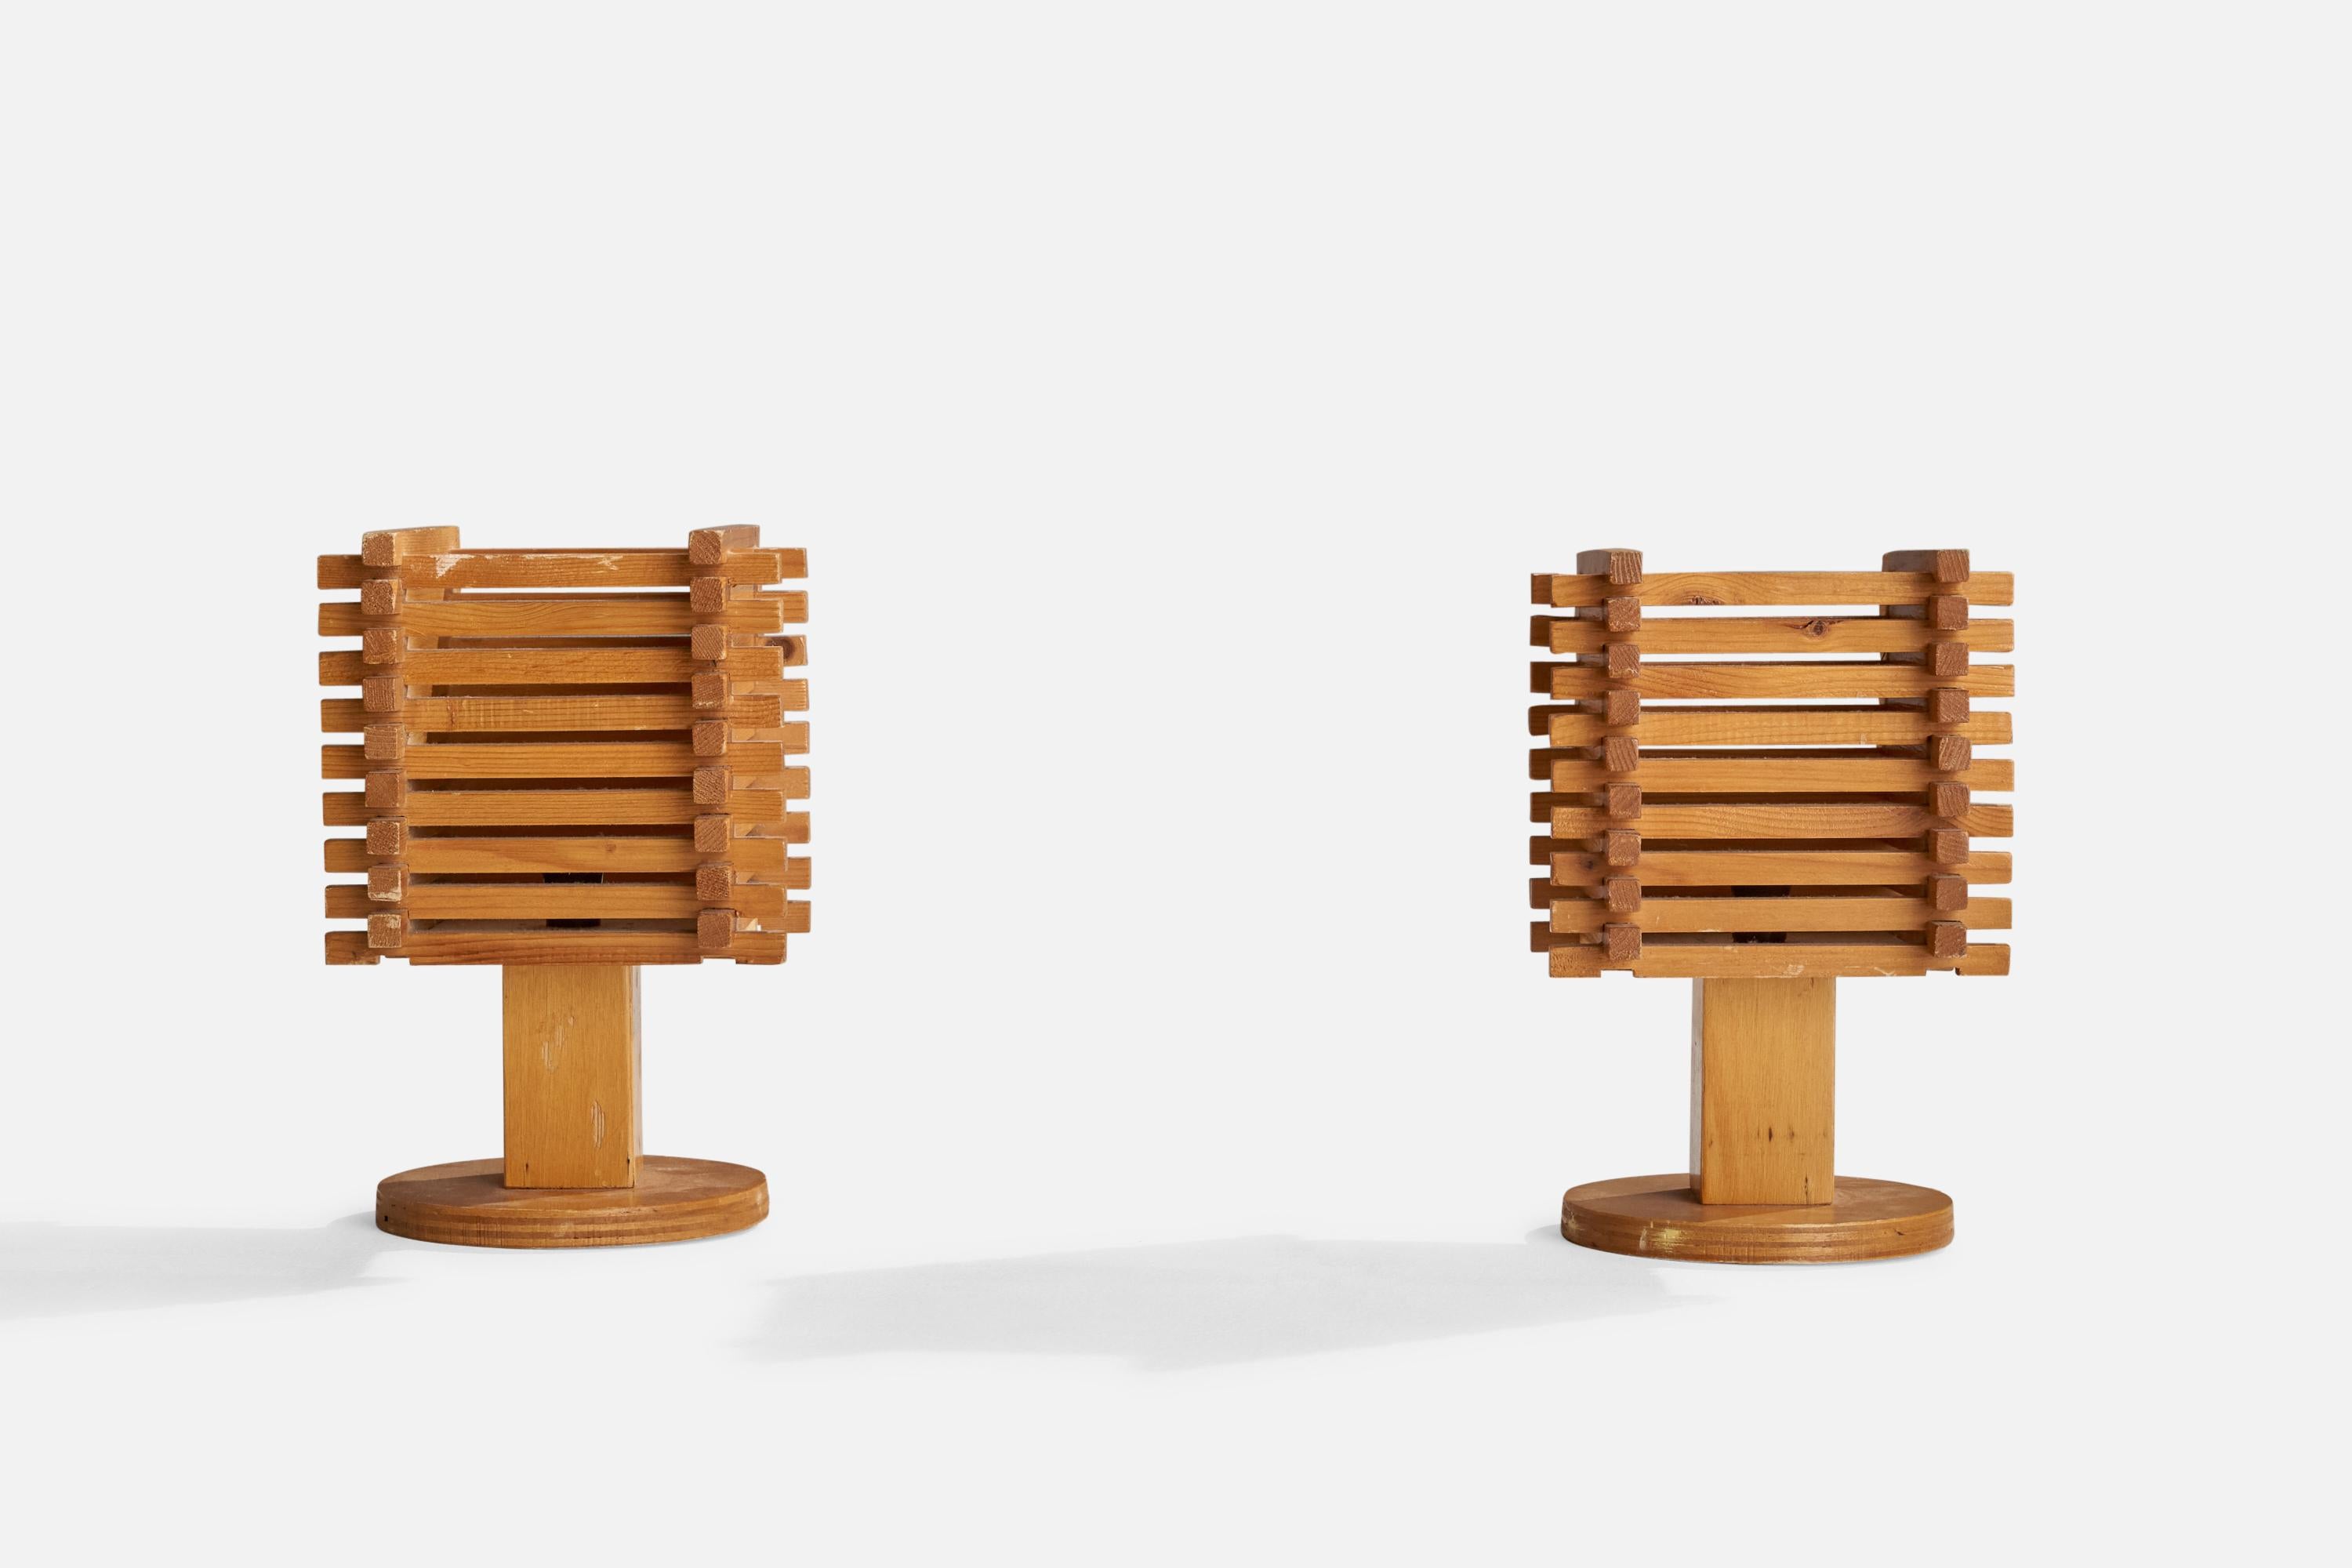 A pair of wood table lamps designed and produced in Italy, c. 1960s.

Overall Dimensions (inches): 11” H x 7” W x 6.5” D
Stated dimensions include shade.
Bulb Specifications: E-14 Bulb
Number of Sockets: 2
All lighting will be converted for US